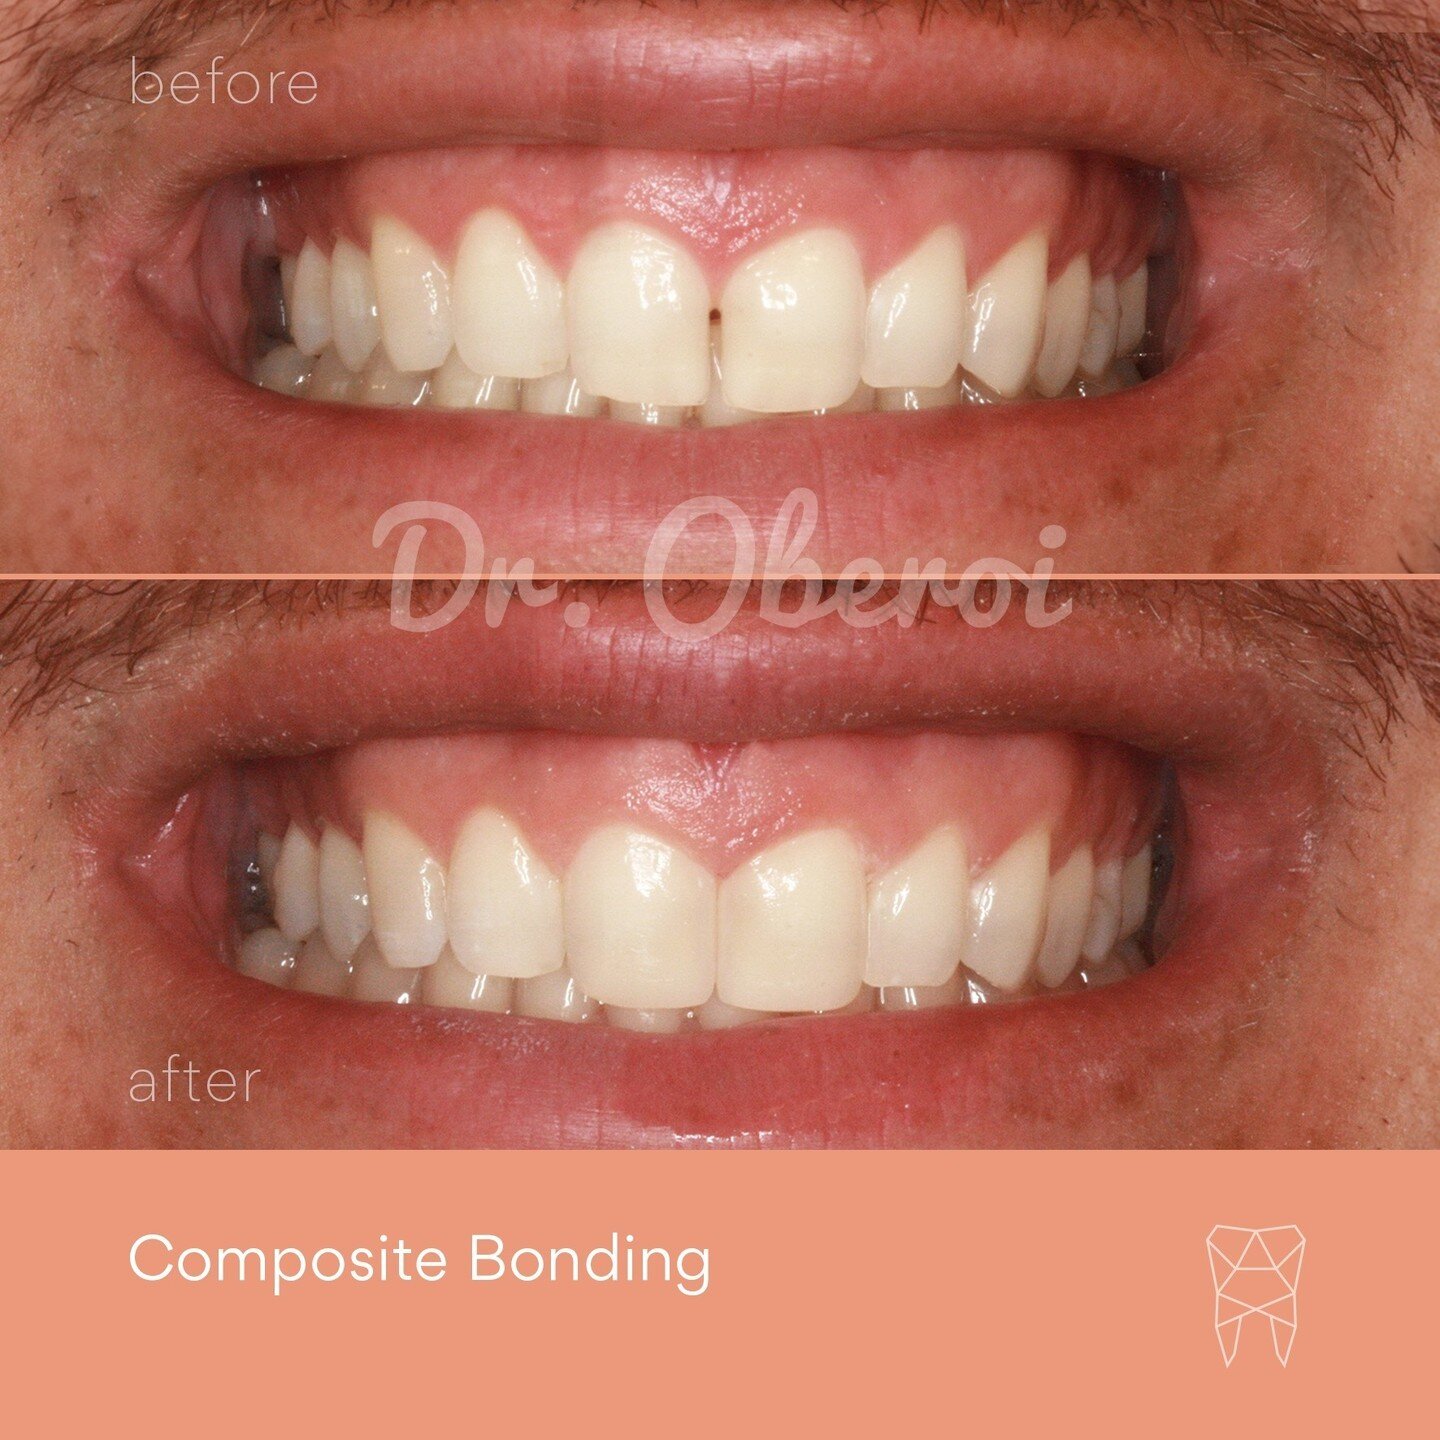 A fantastic result from a small and quick procedure! Dr Oberoi used composite bonding to close the gap in our patient's front teeth to create a beautiful uniform smile ✨⁠
⁠
🦷 Composite bonding⁠
⏰ Takes 20 minutes⁠
💲 from $150 per tooth⁠
⁠
Consideri